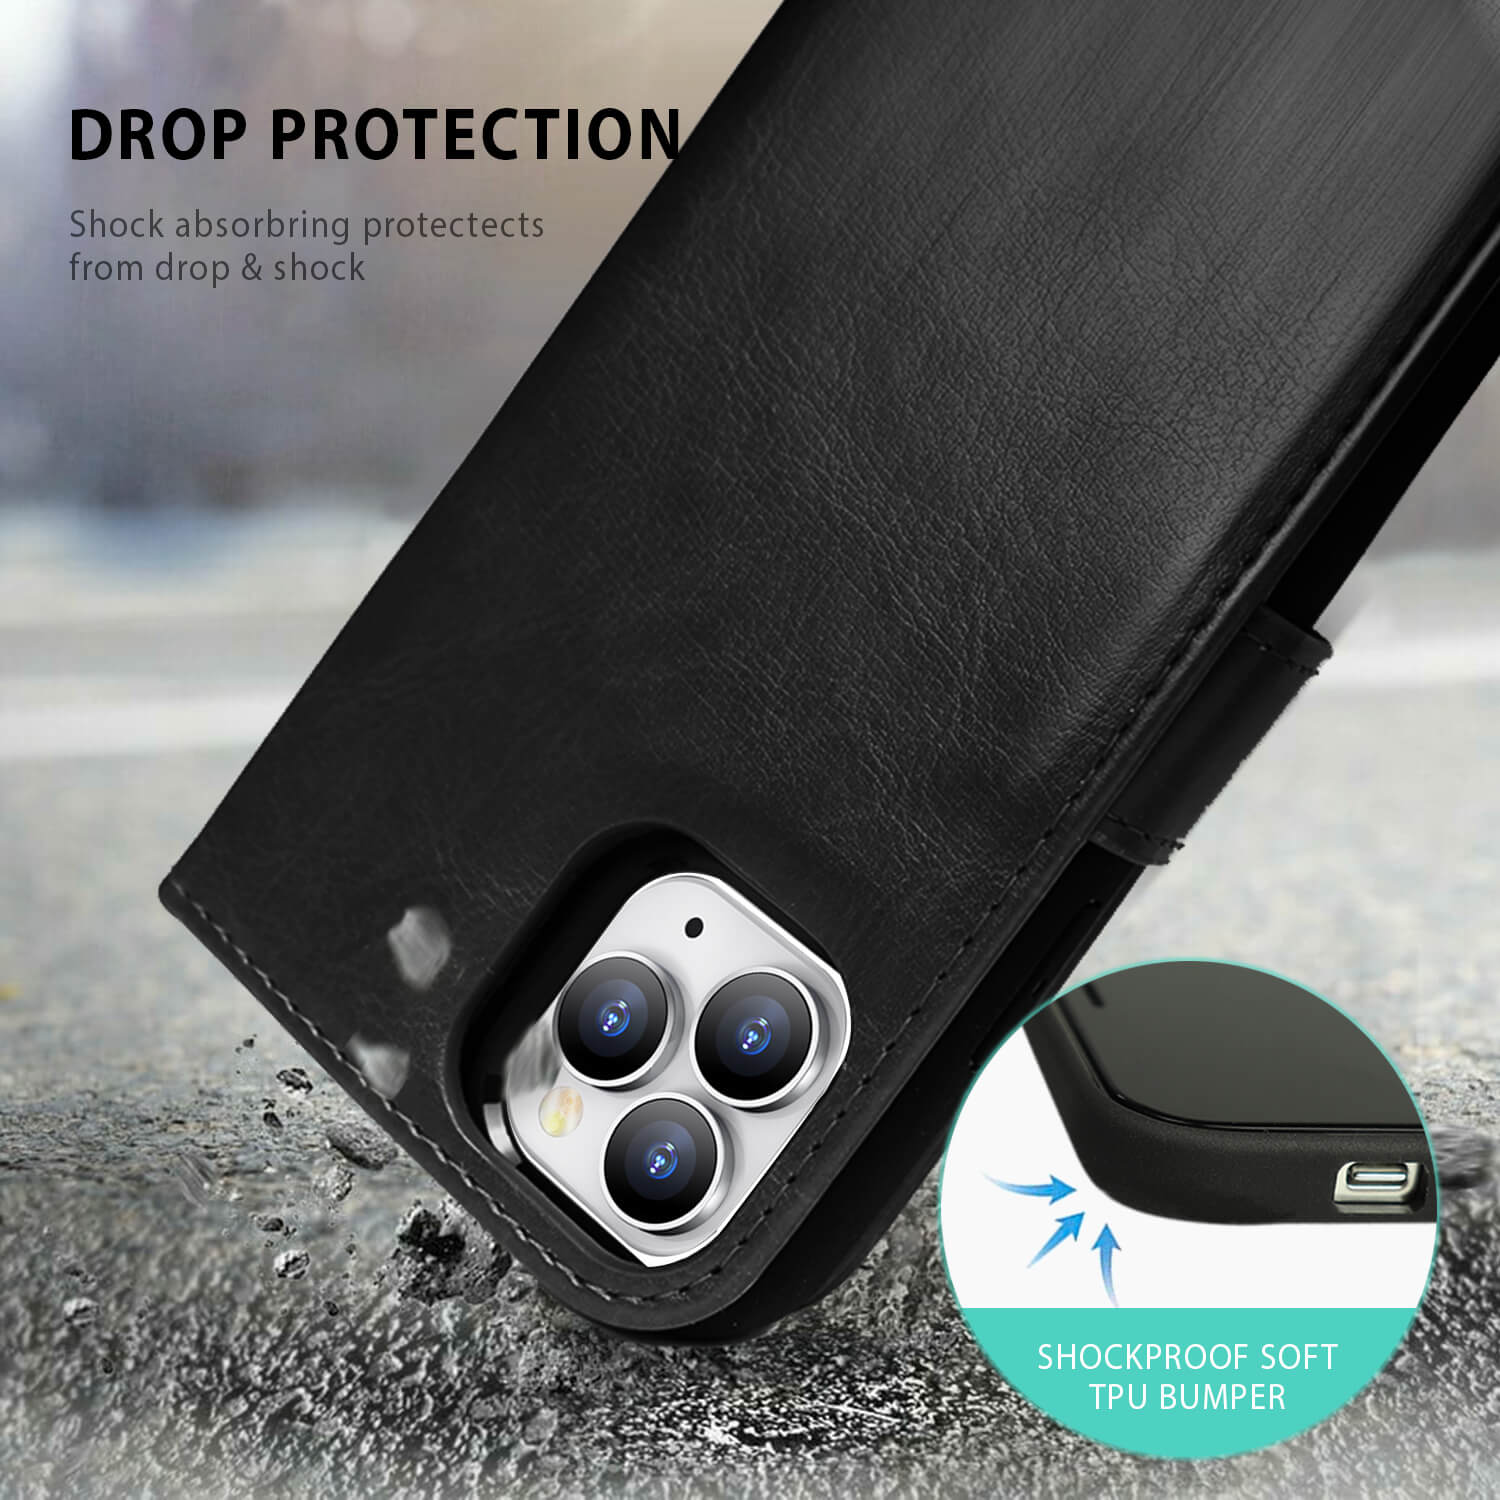 Tough On iPhone 15 Pro Max Case Magnetic Detachable Leather